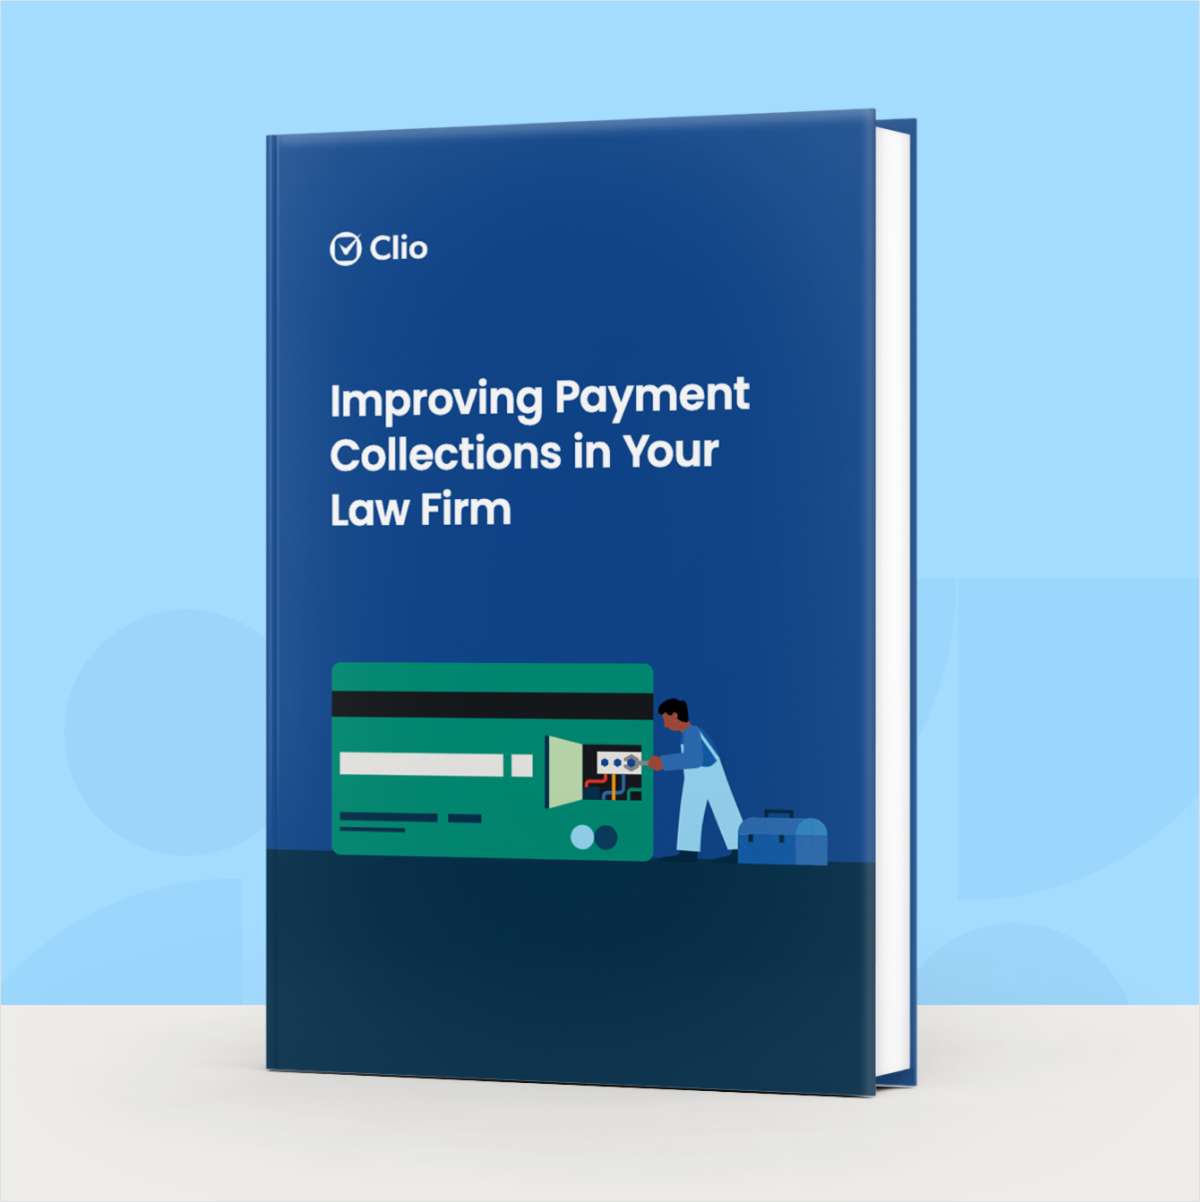 Clio: Improving Payment Collections in Your Law Firm